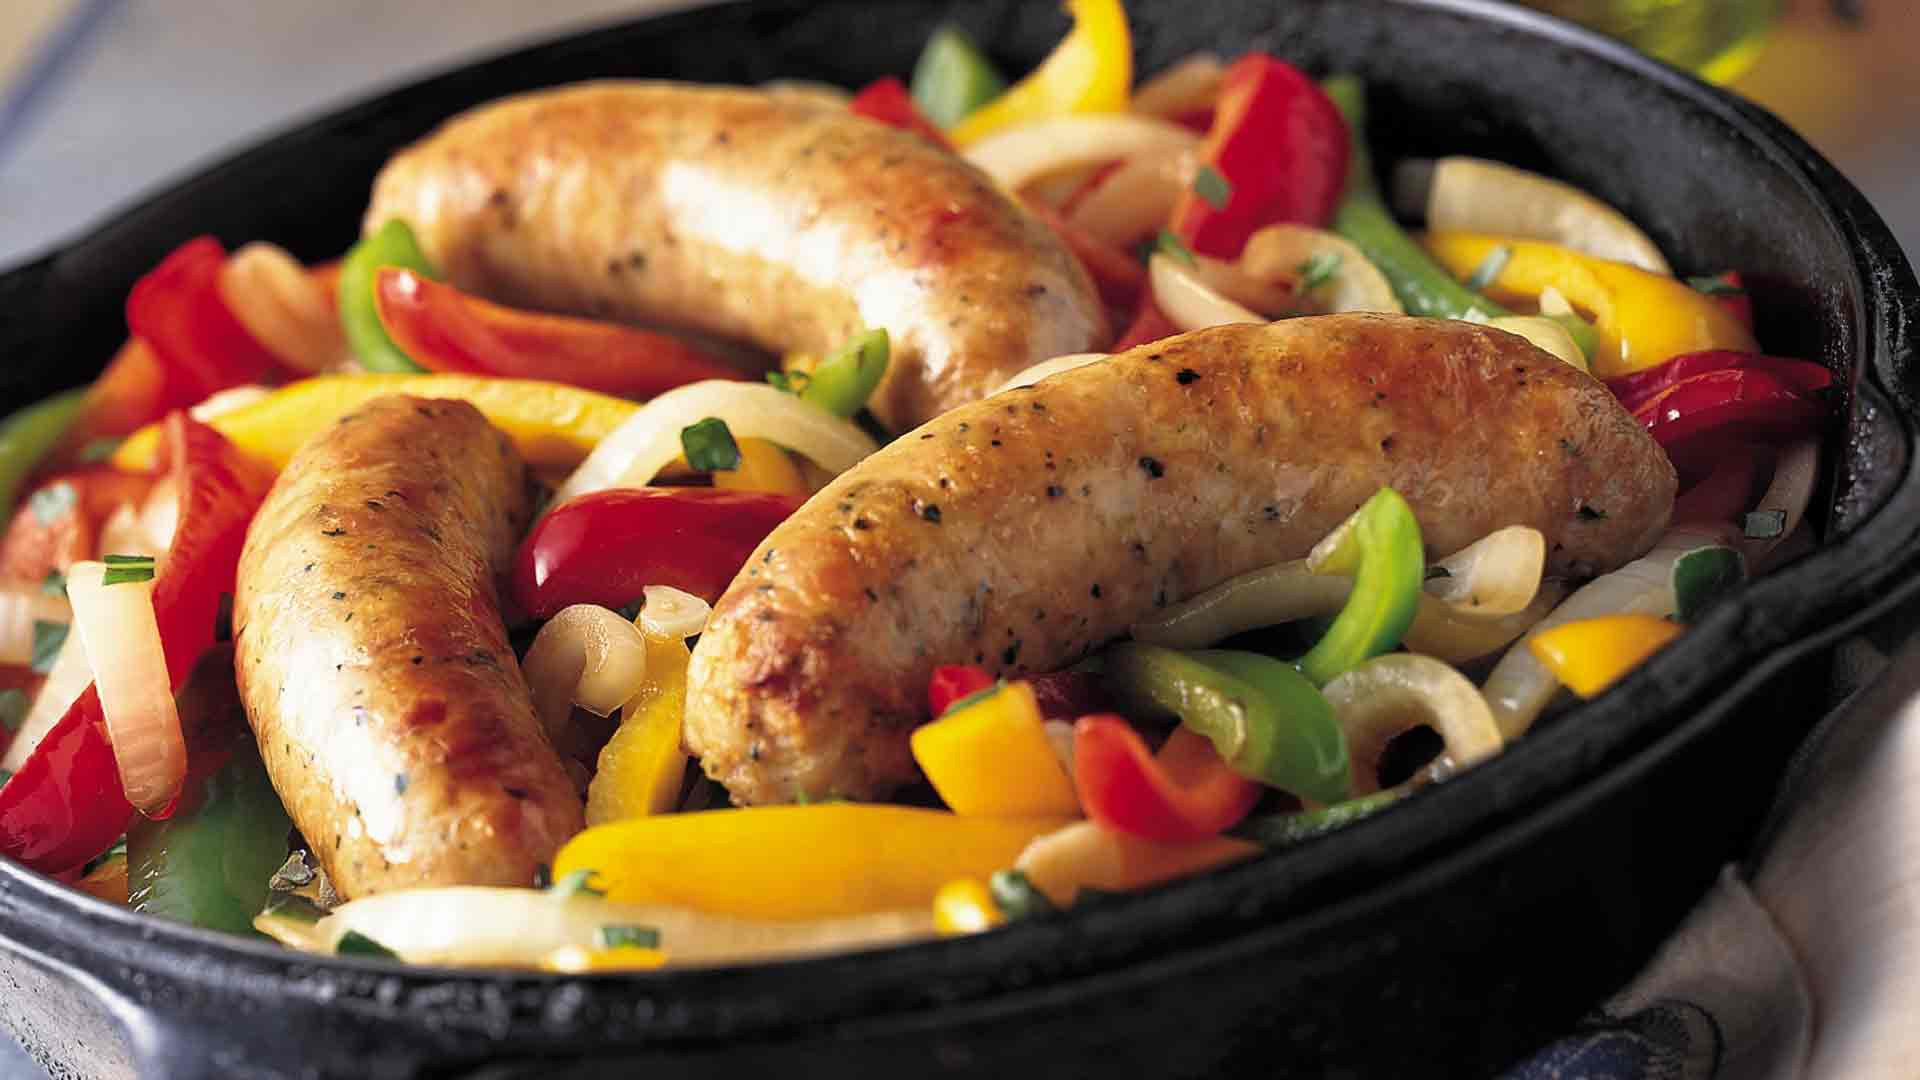 Recipes For Italian Sausage
 This Homemade Italian Sausage Recipe Is Unlike Anything